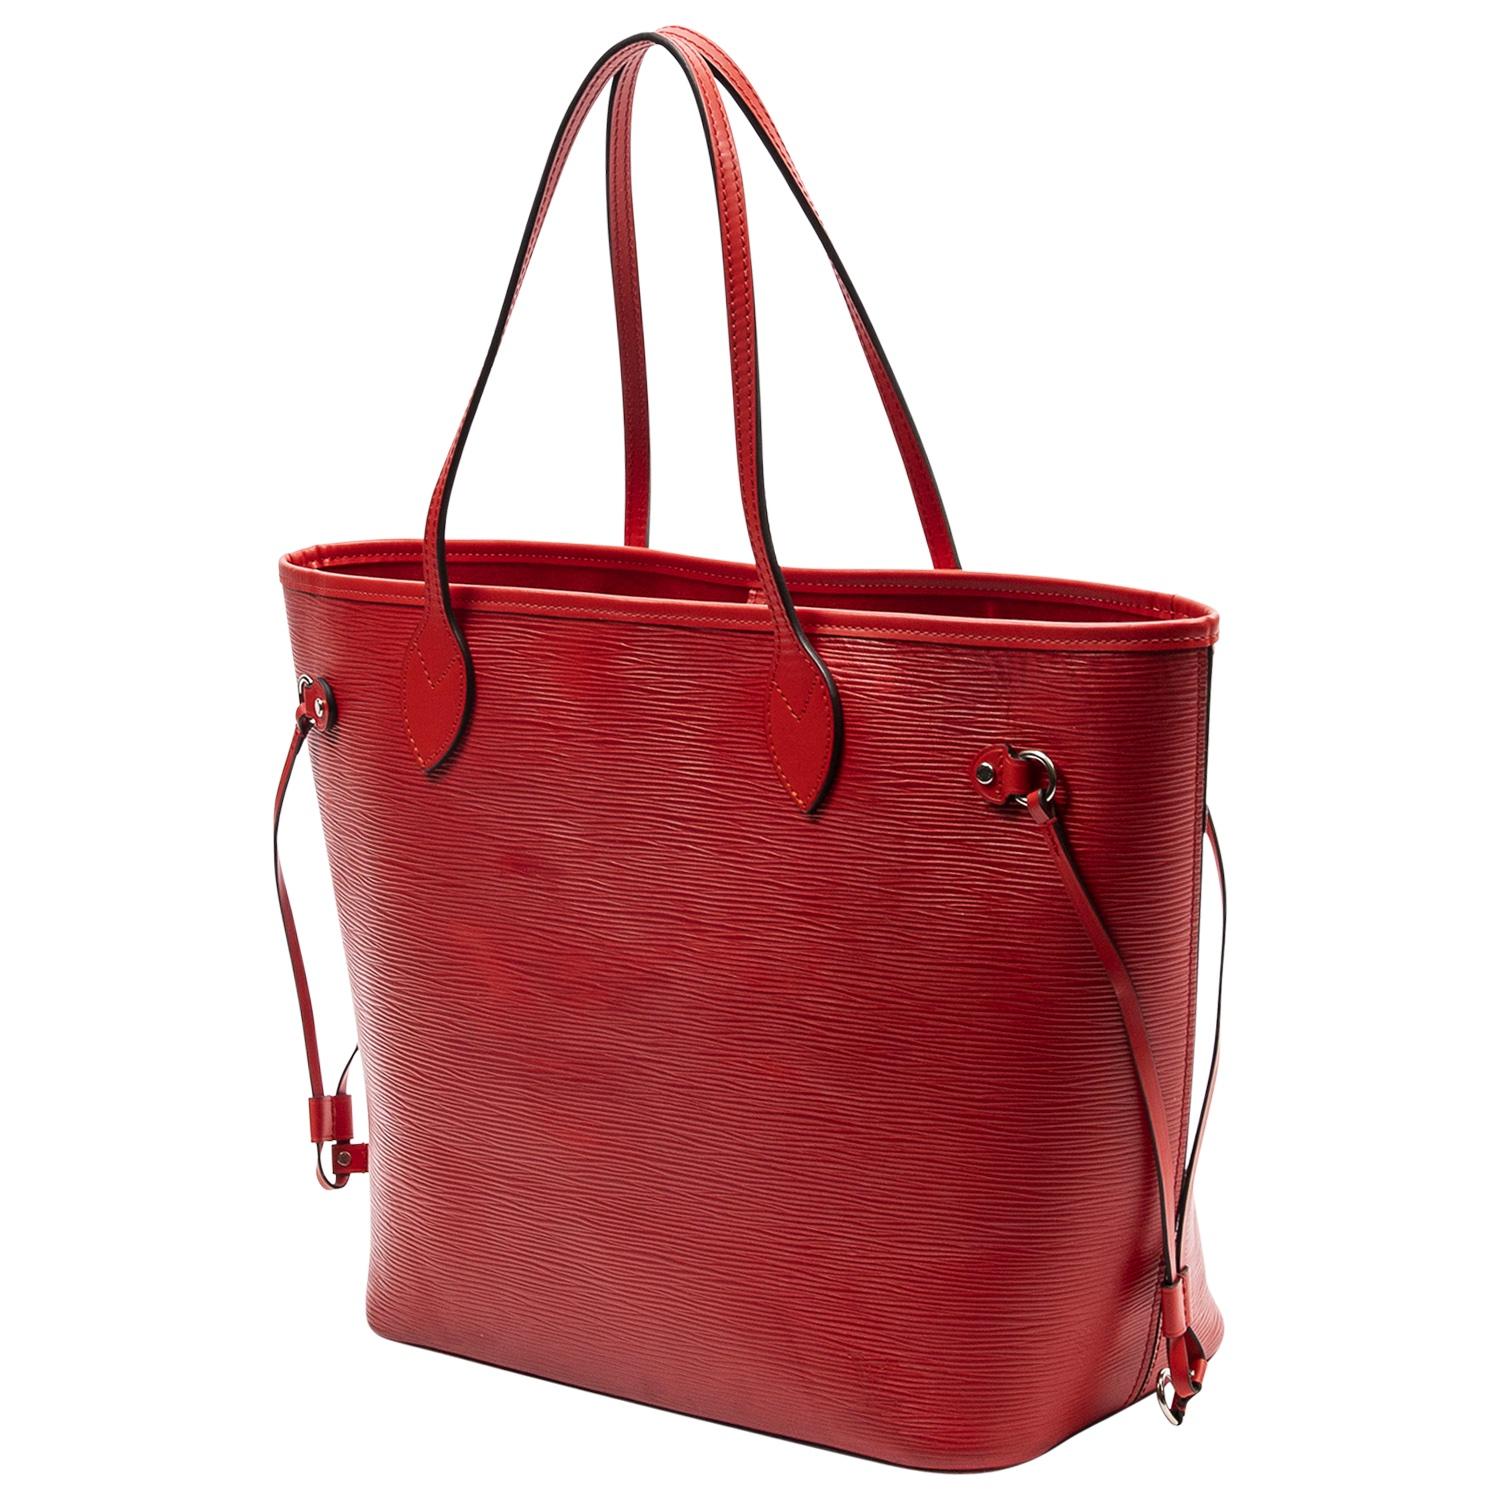 In a beautiful Corvette red Epi leather, this beautiful neverfull is in the perfect MM size large enough to fit even the biggest laptop but compact enough to not feel overwhelmingly huge! With dual red leather shoulder straps, drawstring pulls at